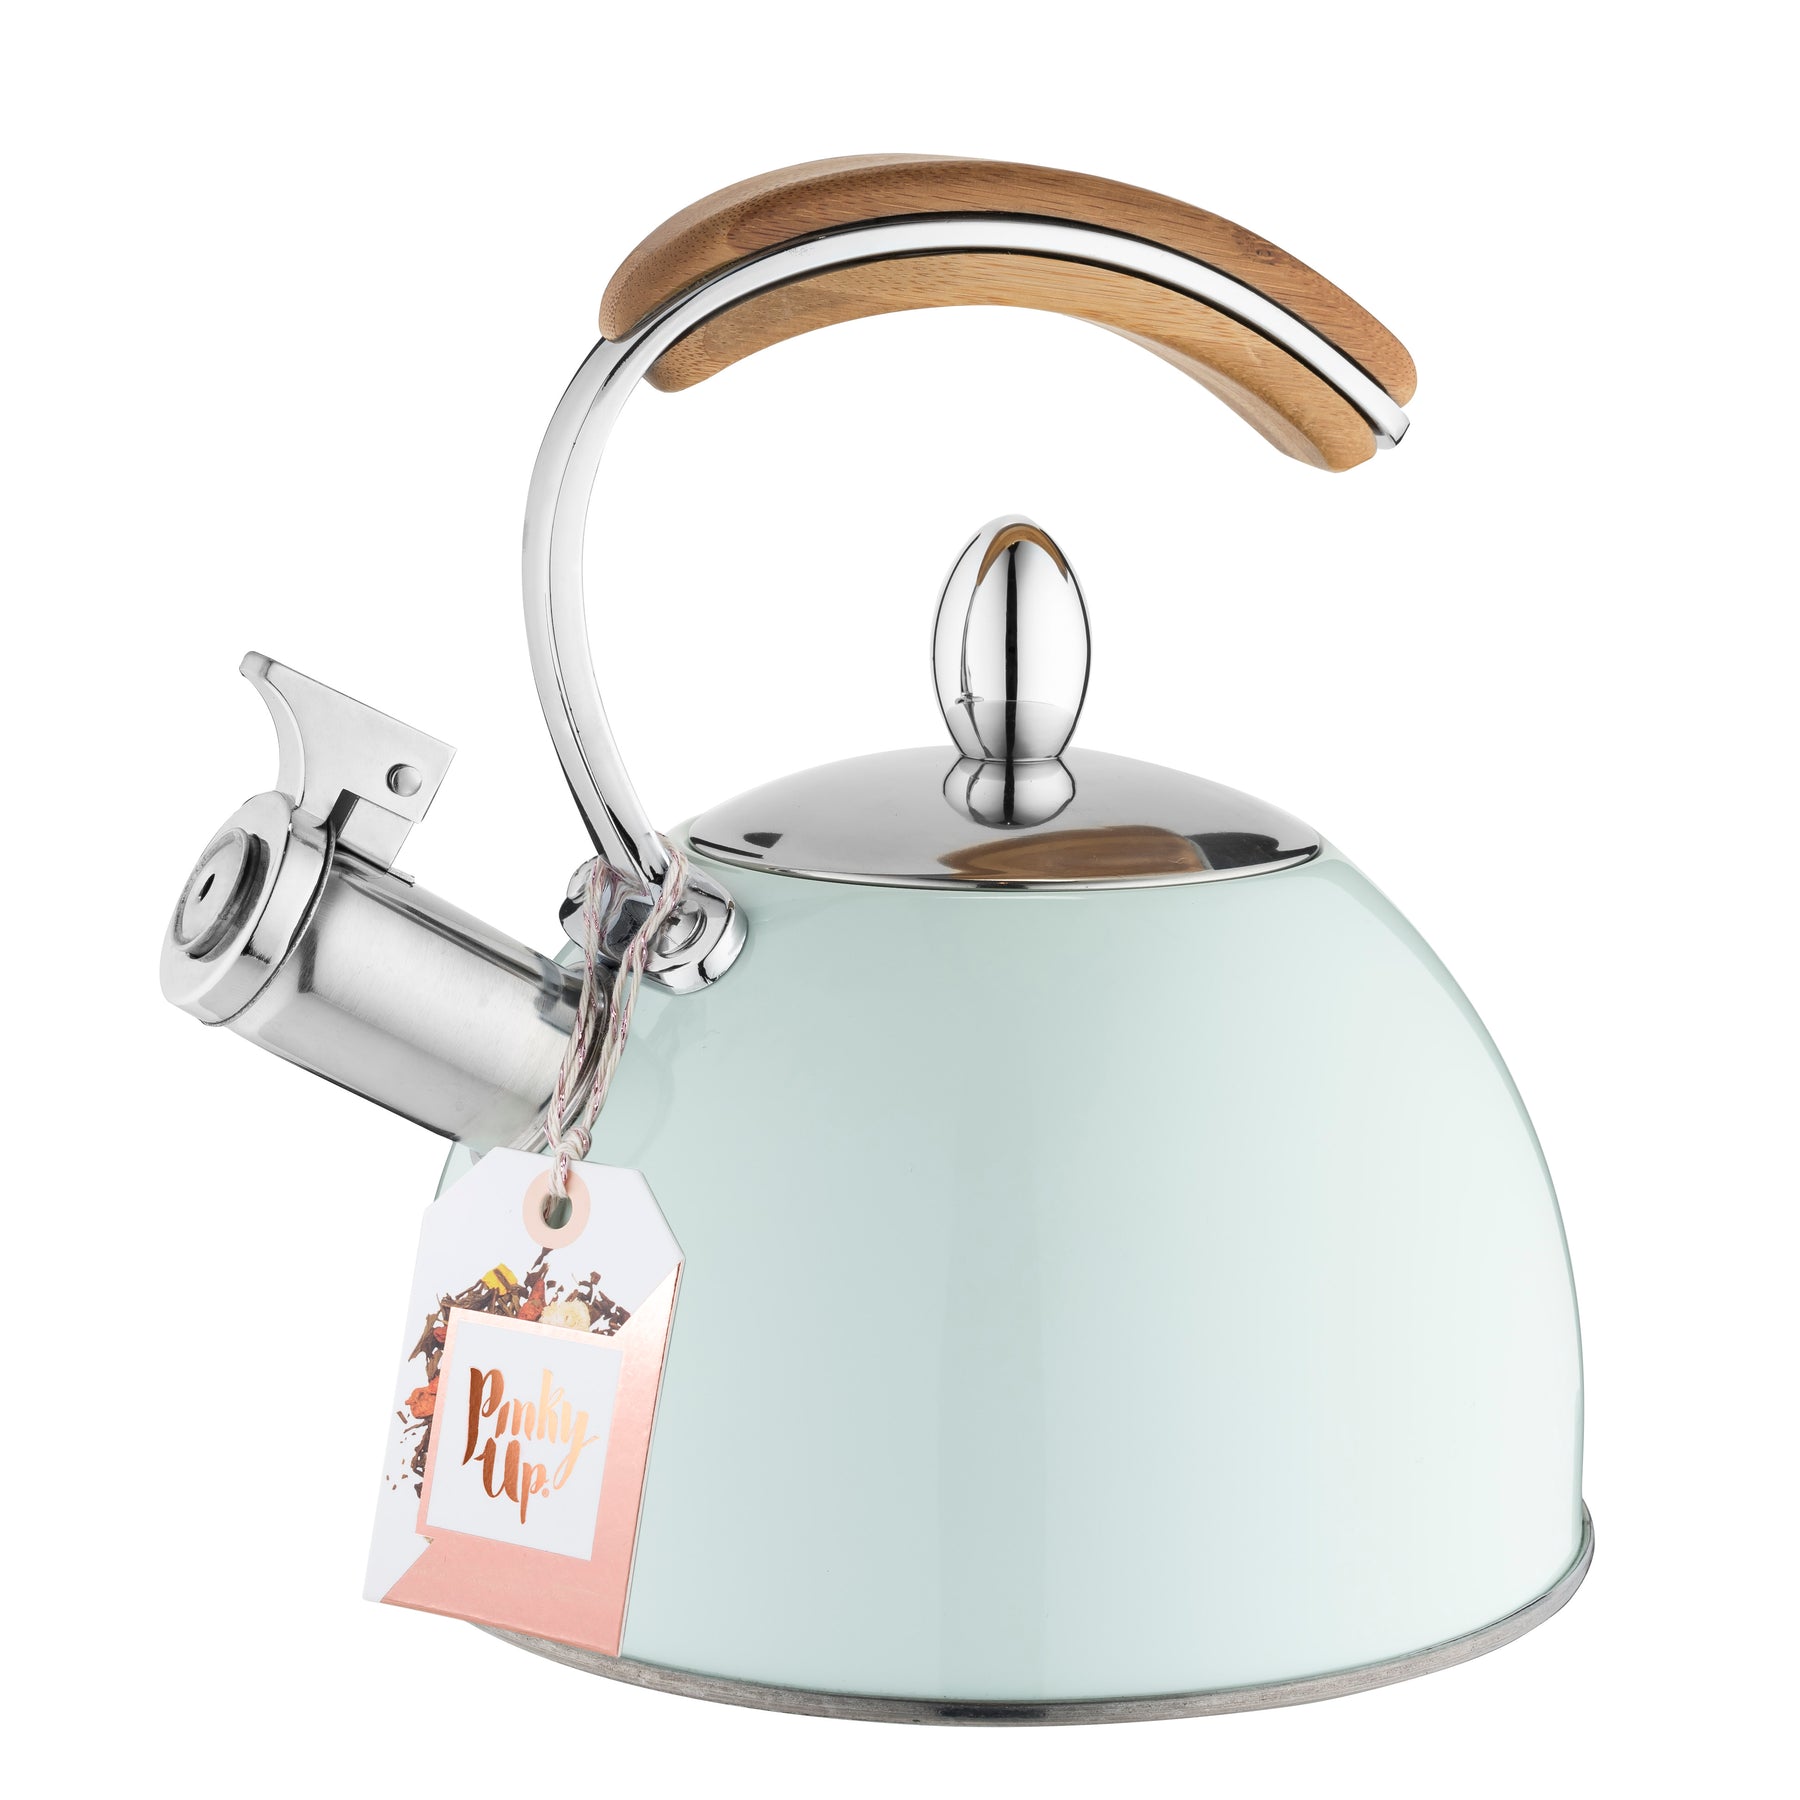 Pinky Up Presley Tea Kettle, Stovetop Stainless Steel Kettle, Whistling, Tea  Accessorie gifts, Fast Boil Water Kettle, Wooden Handle, 70 oz, Gold –  Pinky Up Tea